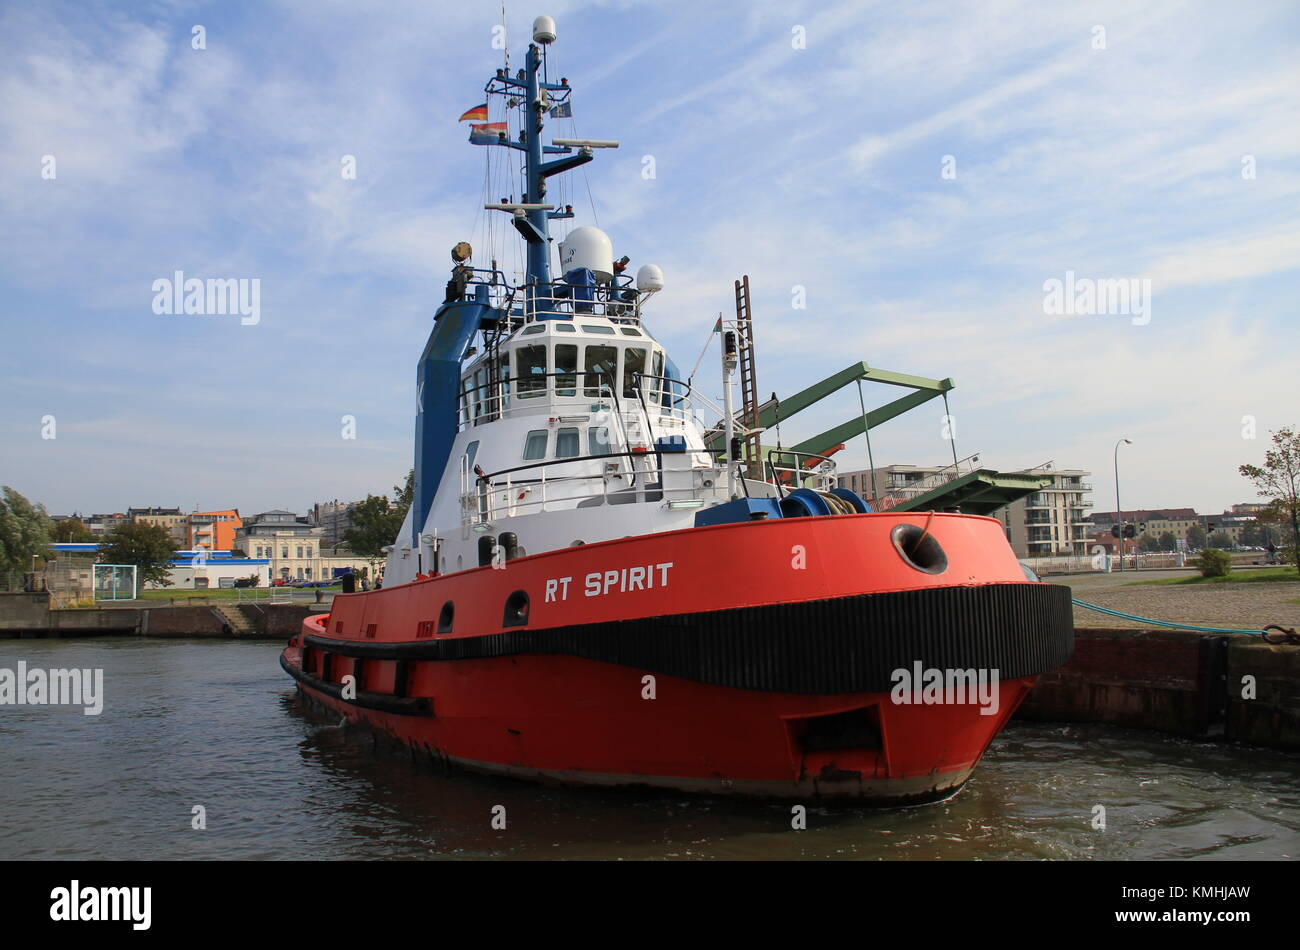 The harbor tug RT Spirit is on 5 October 2015 in the port of Bremerhaven. Stock Photo